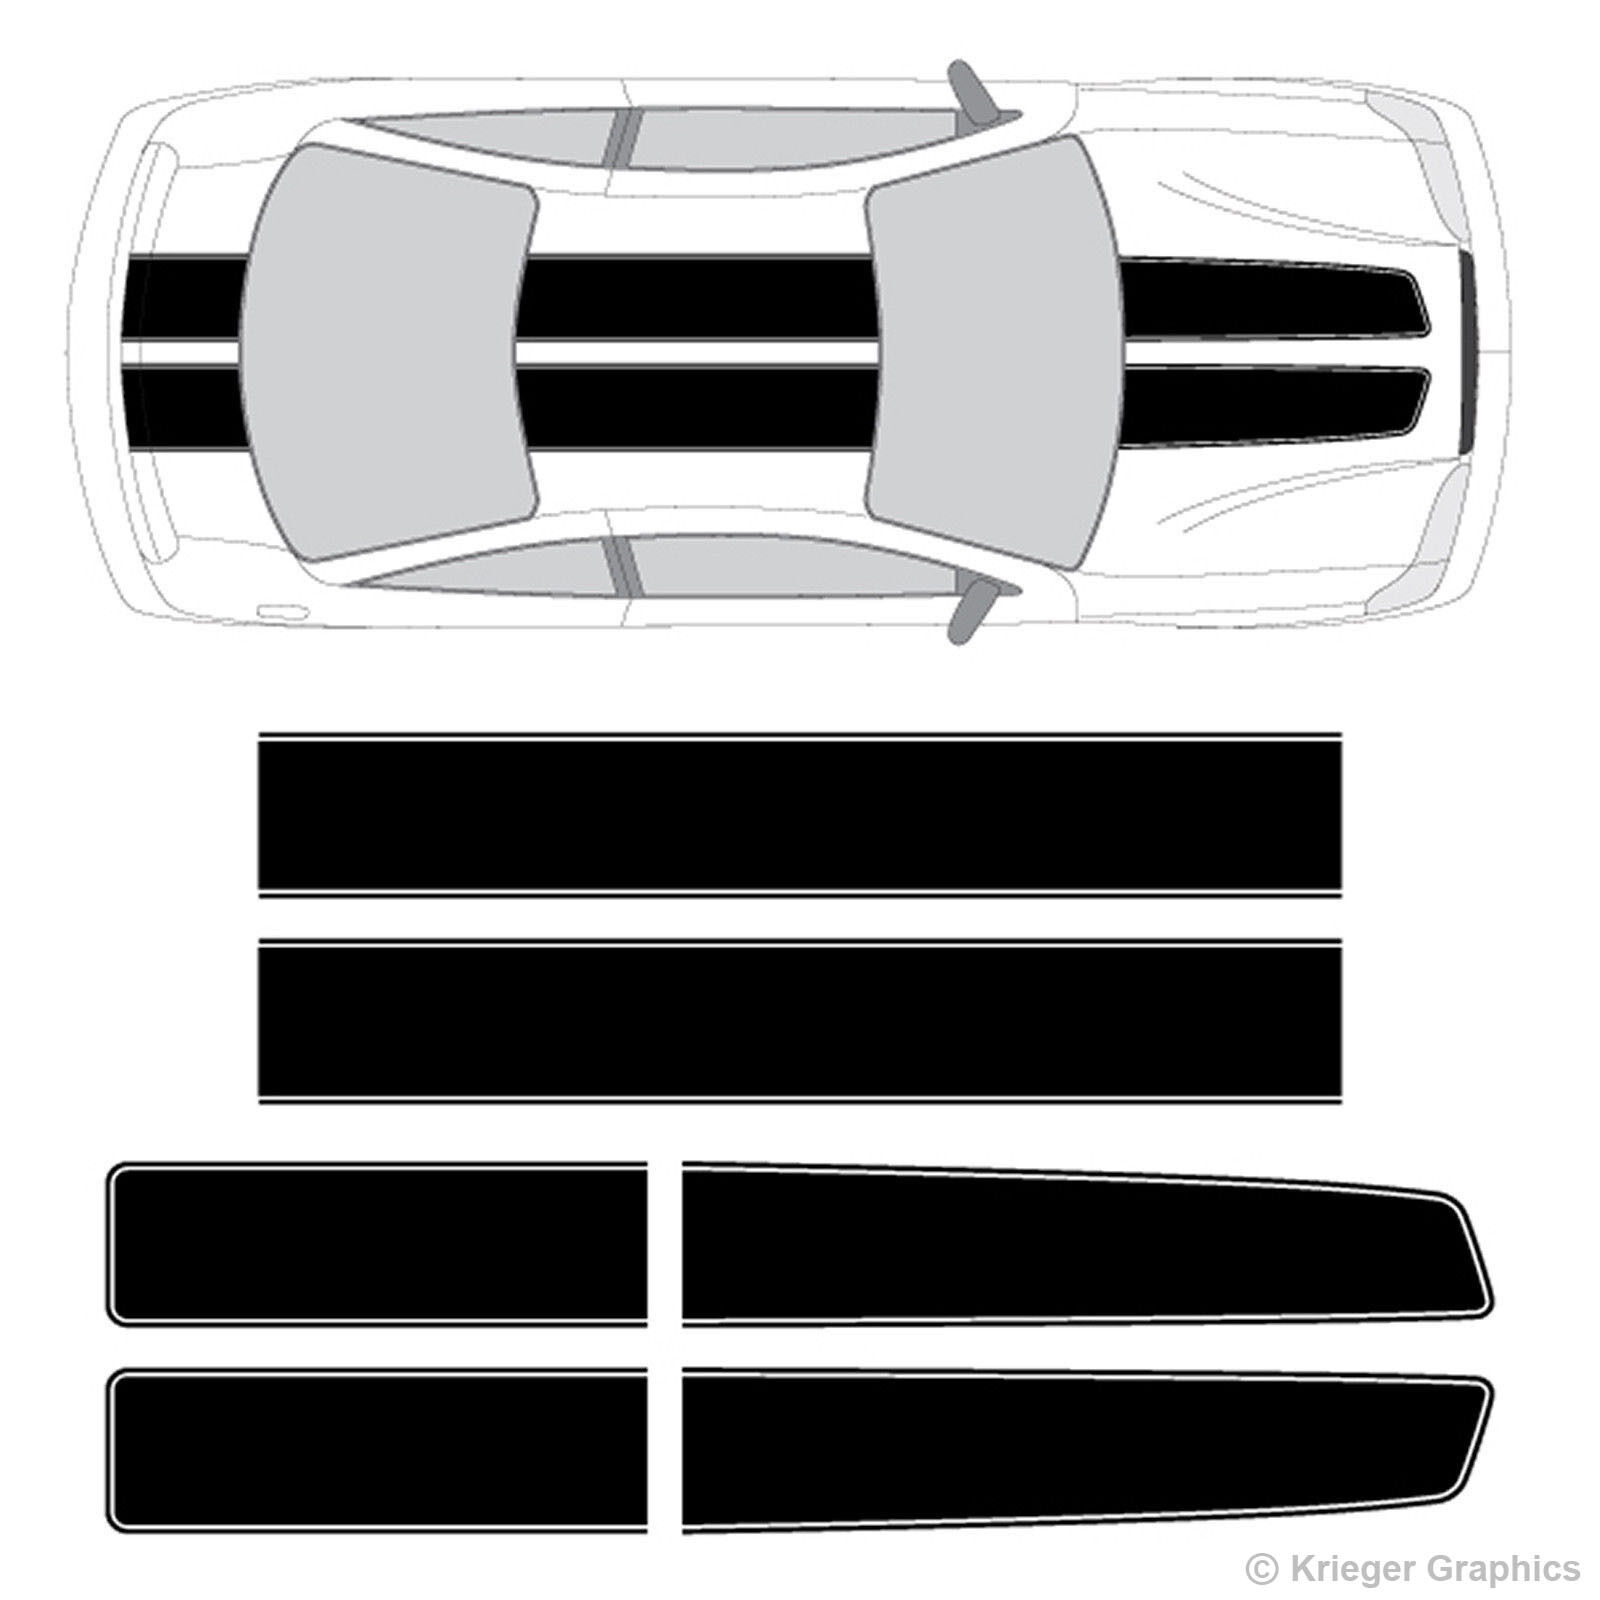 EZ Rally Racing Stripes 3M Vinyl Stripe Graphic Decals for Chevy Cavalier 